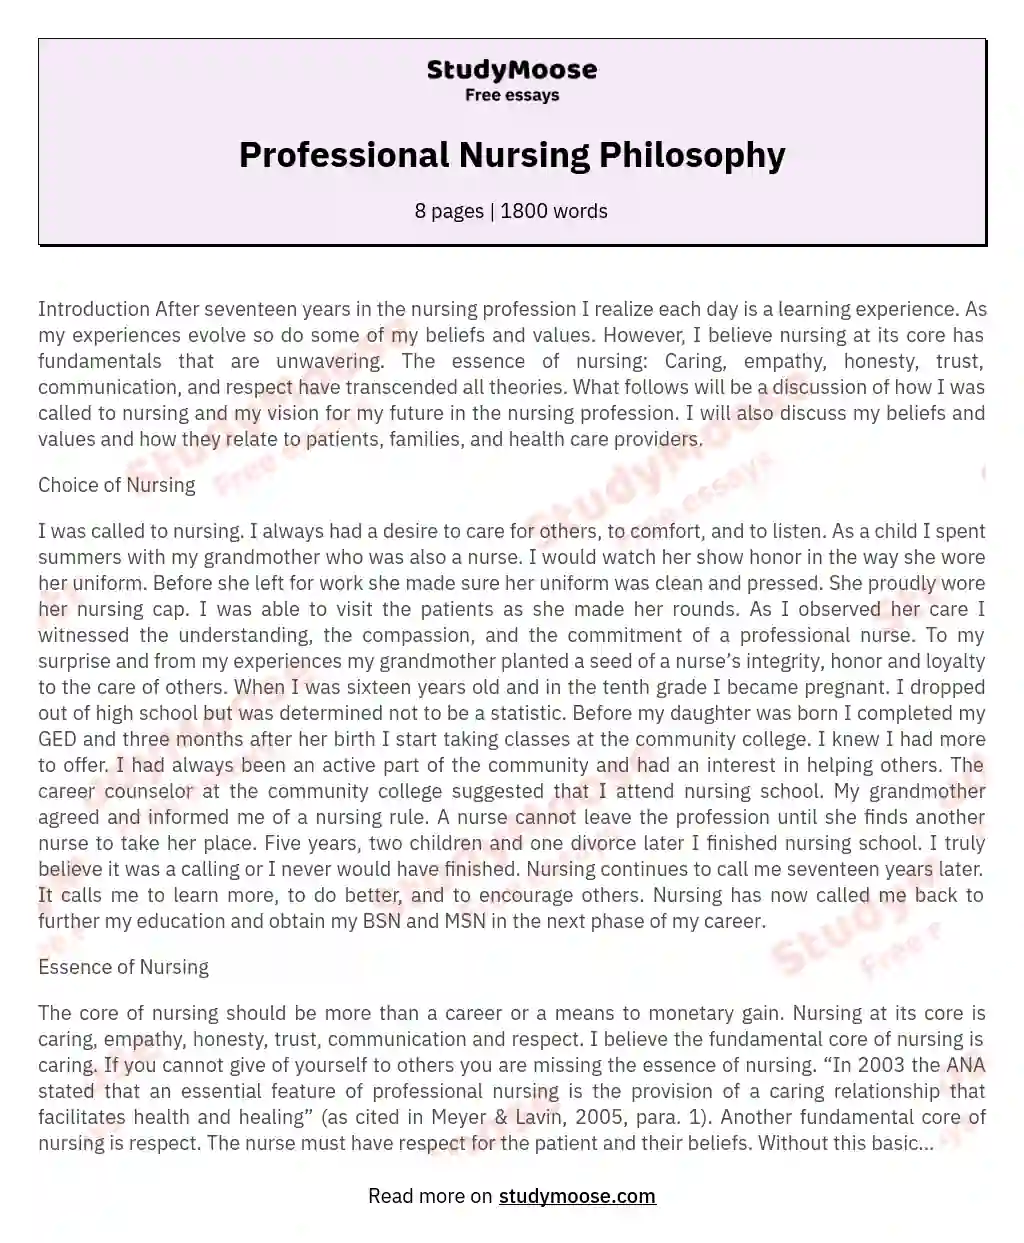 The Essence of Nursing: Caring, Values, and Future Vision essay